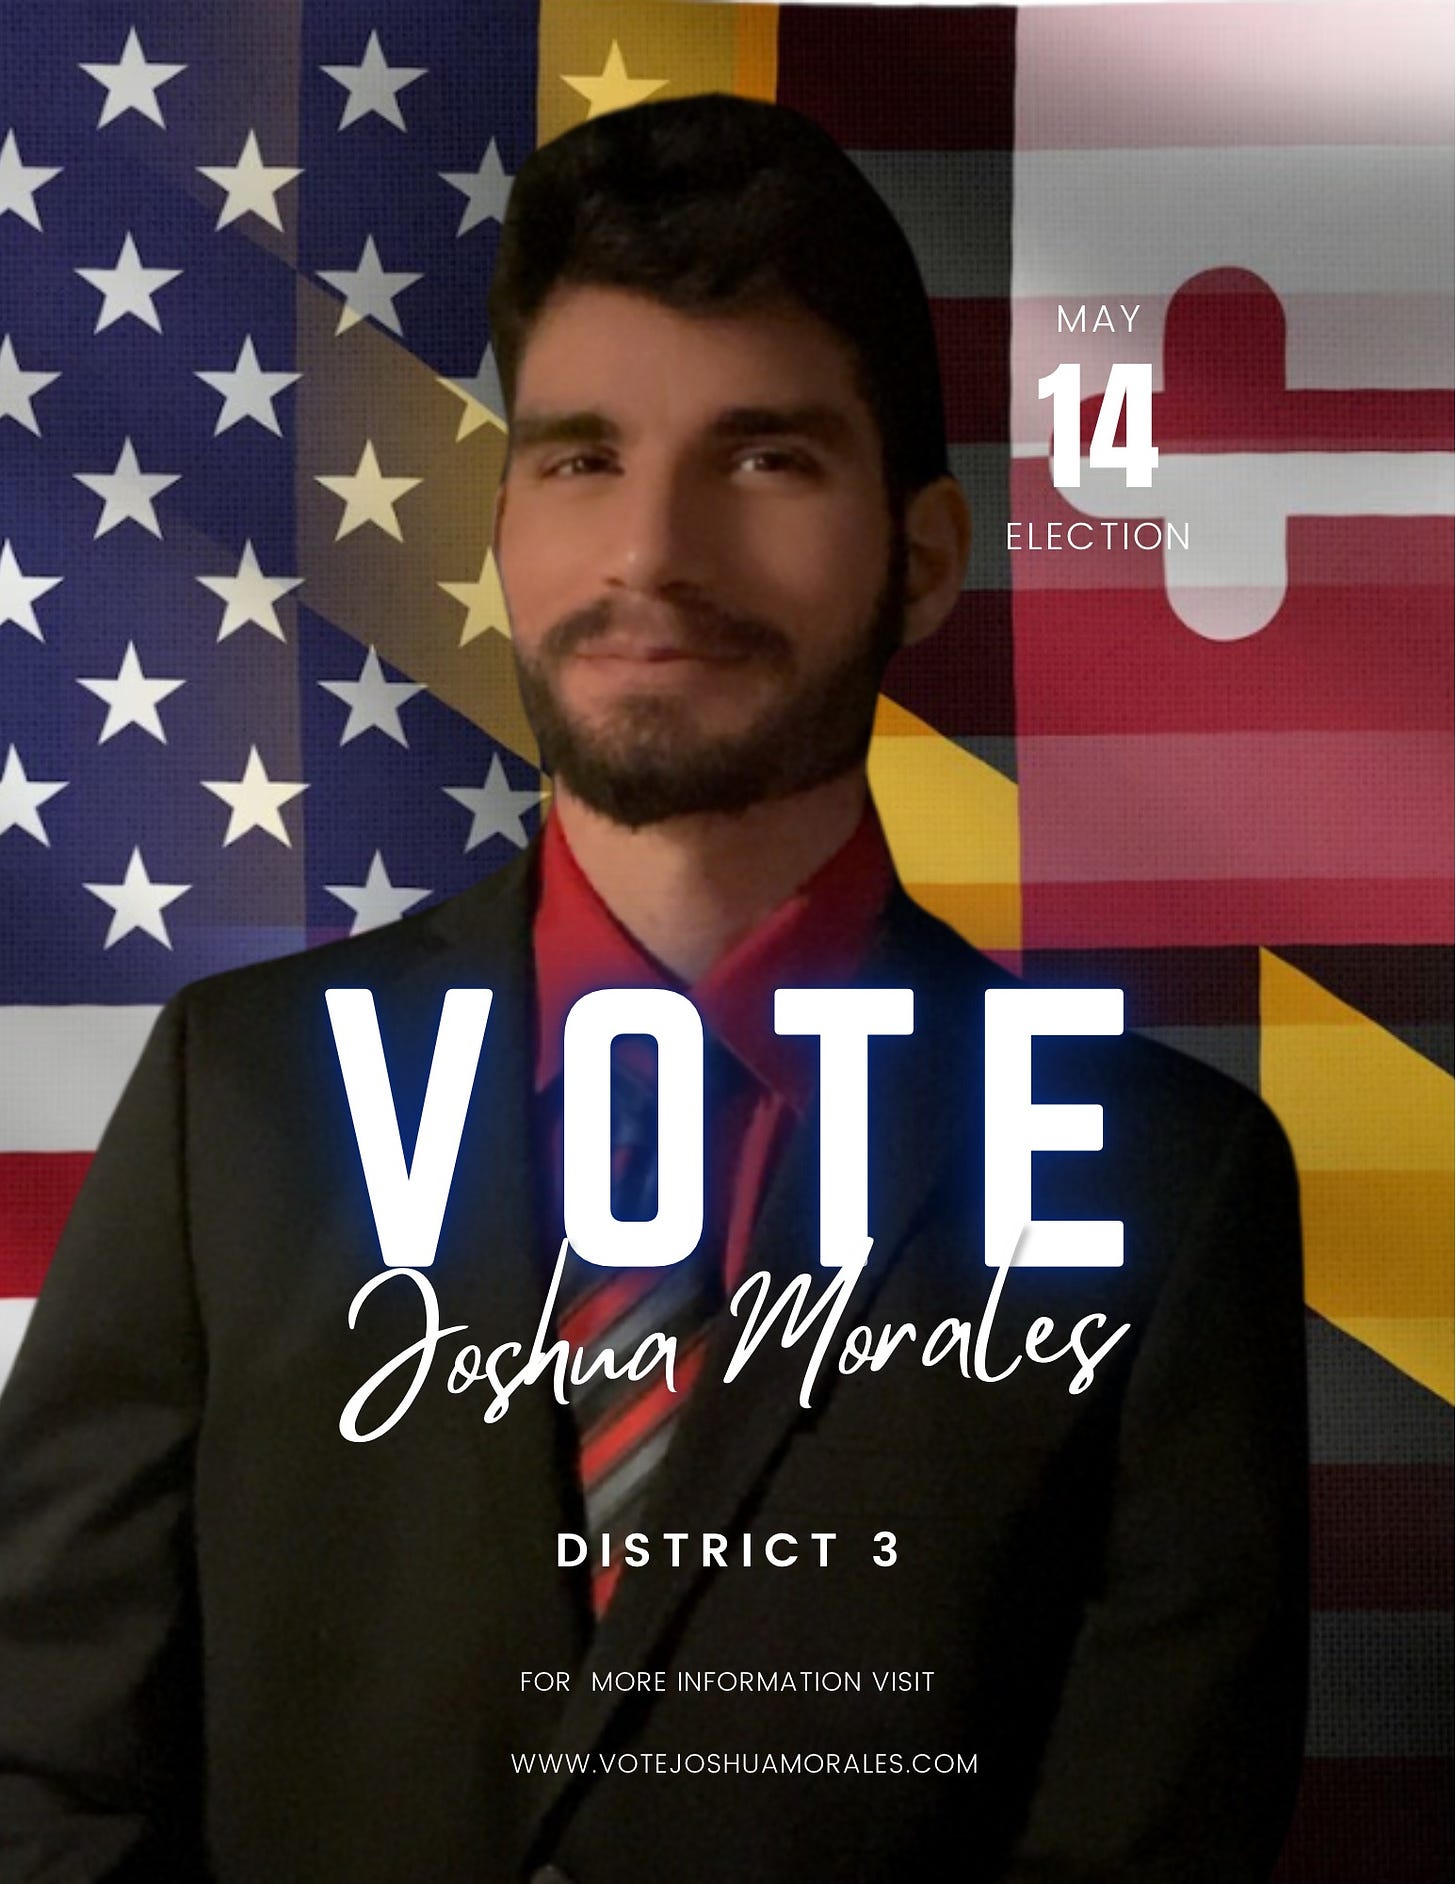 May be an image of 1 person and text that says 'MAY MAY 14 ELECTION V AoAHиa Morales DISTRICT 3 FOR MORE FORMOREINFORMATION OREINFORMATION: IN NFORMATION IS WWWW.VCTEJOSHUJAMORAIES.COM wWW VOT'